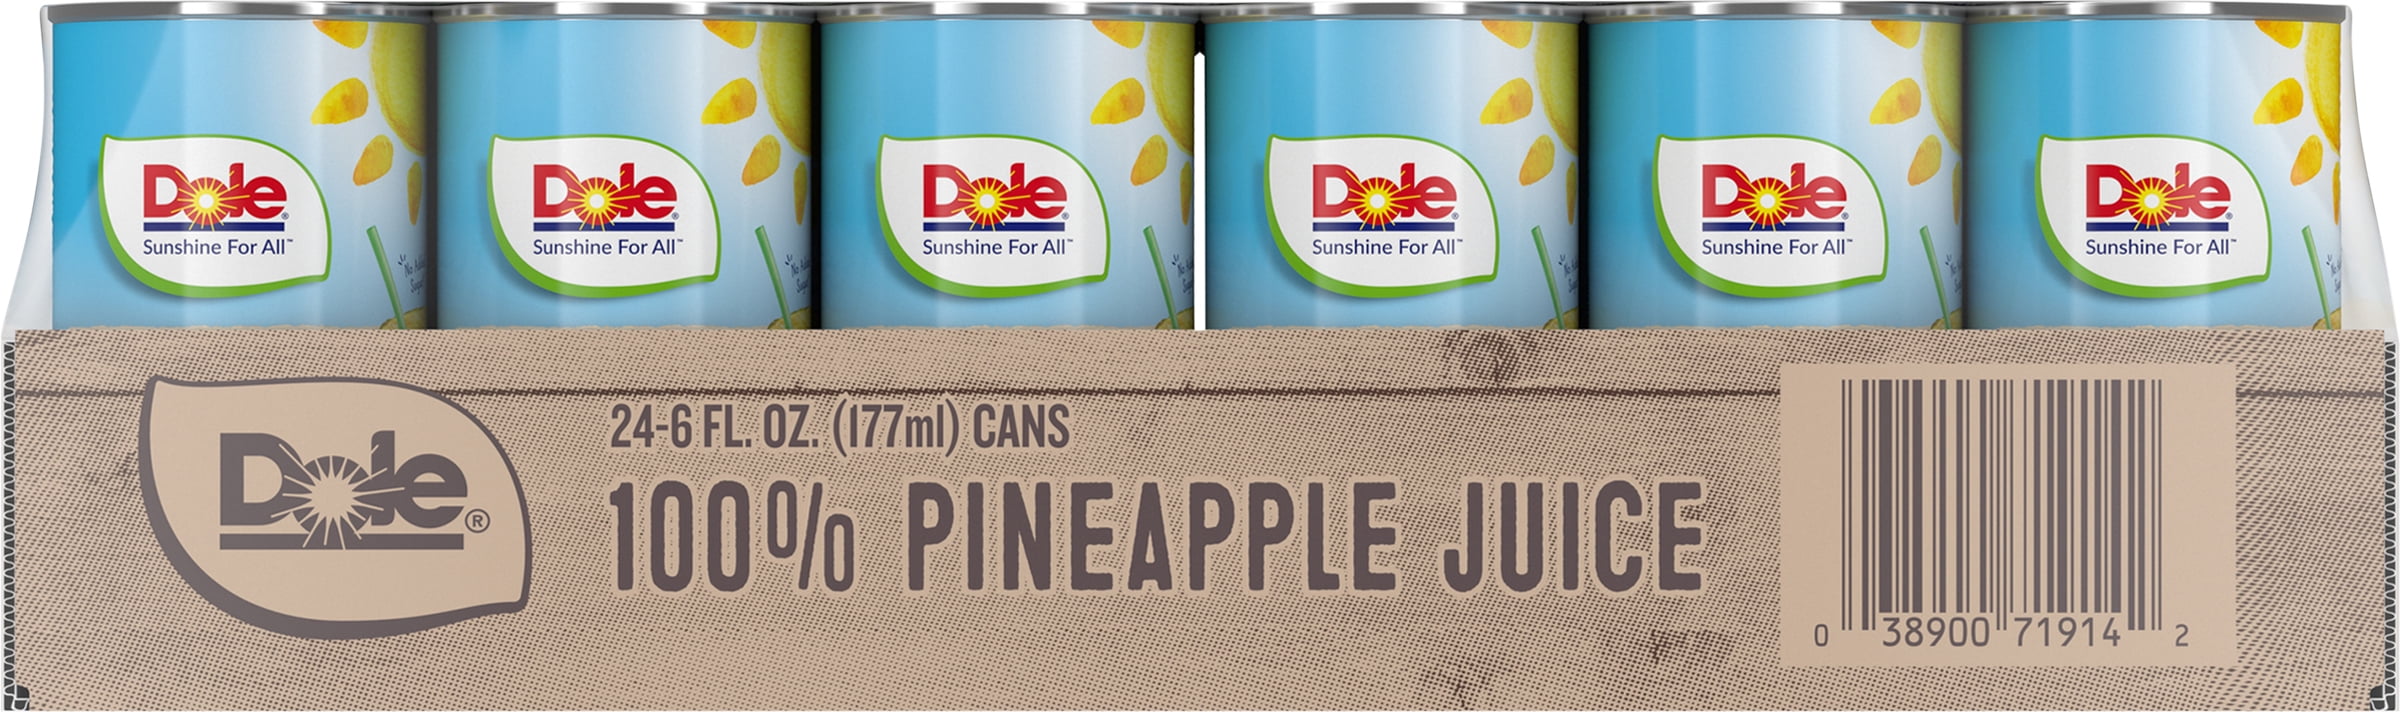 24-Count 6-Oz Dole All Natural 100% Pineapple Juice Cans $10.70 + Free Shipping w/ Walmart+ or $35+